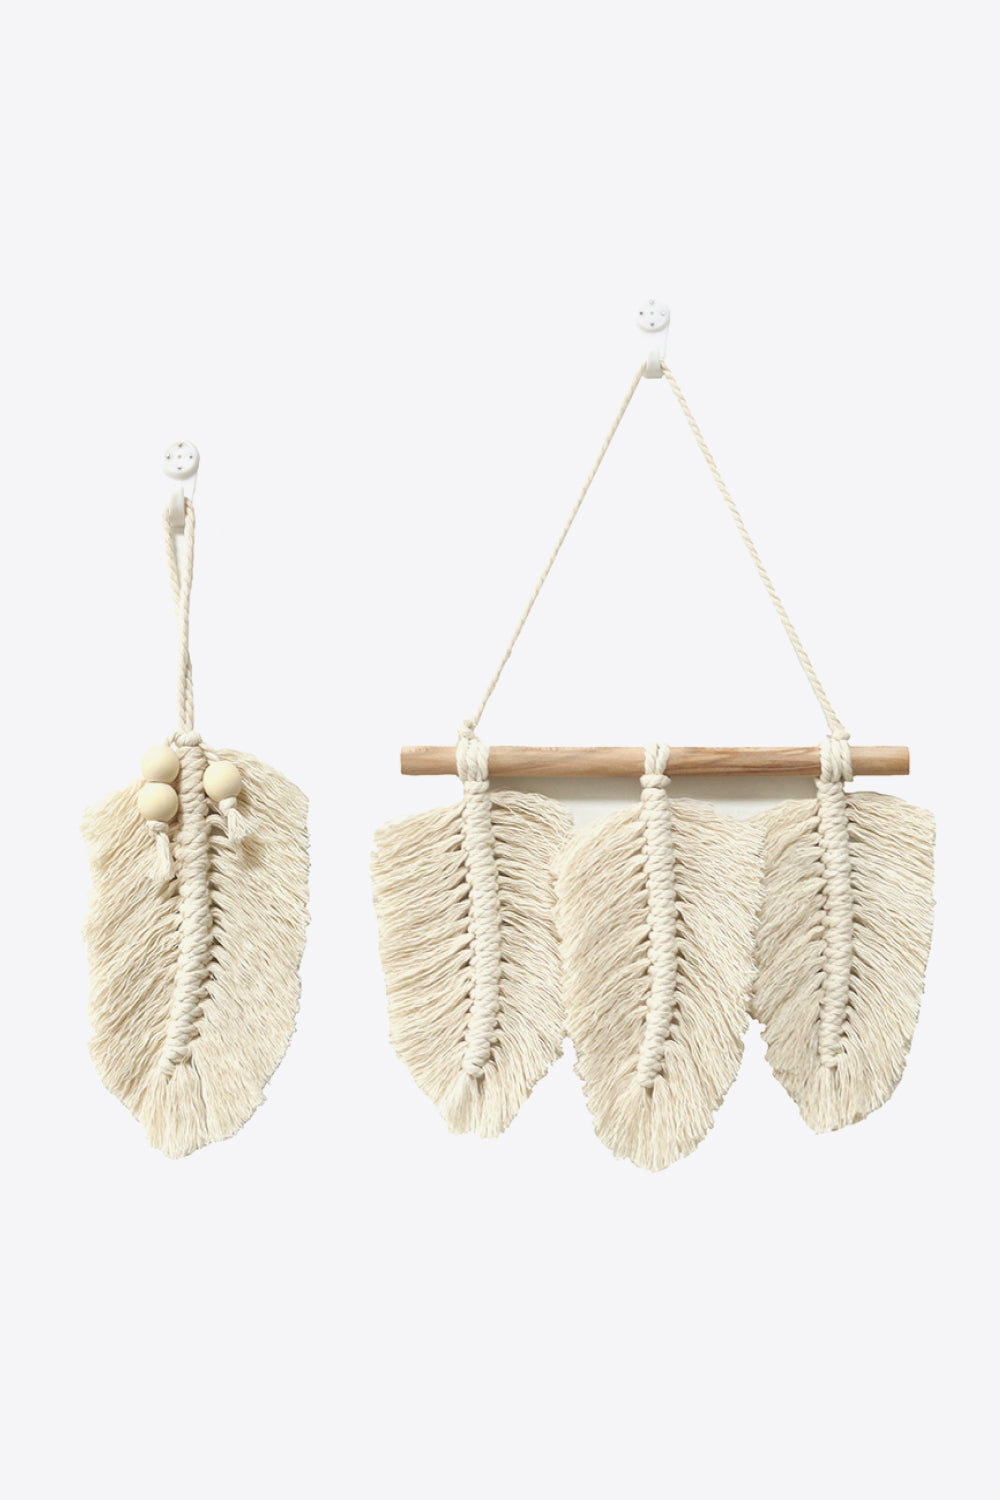 White Smoke Feather Wall Hanging Sentient Beauty Fashions Home Decor